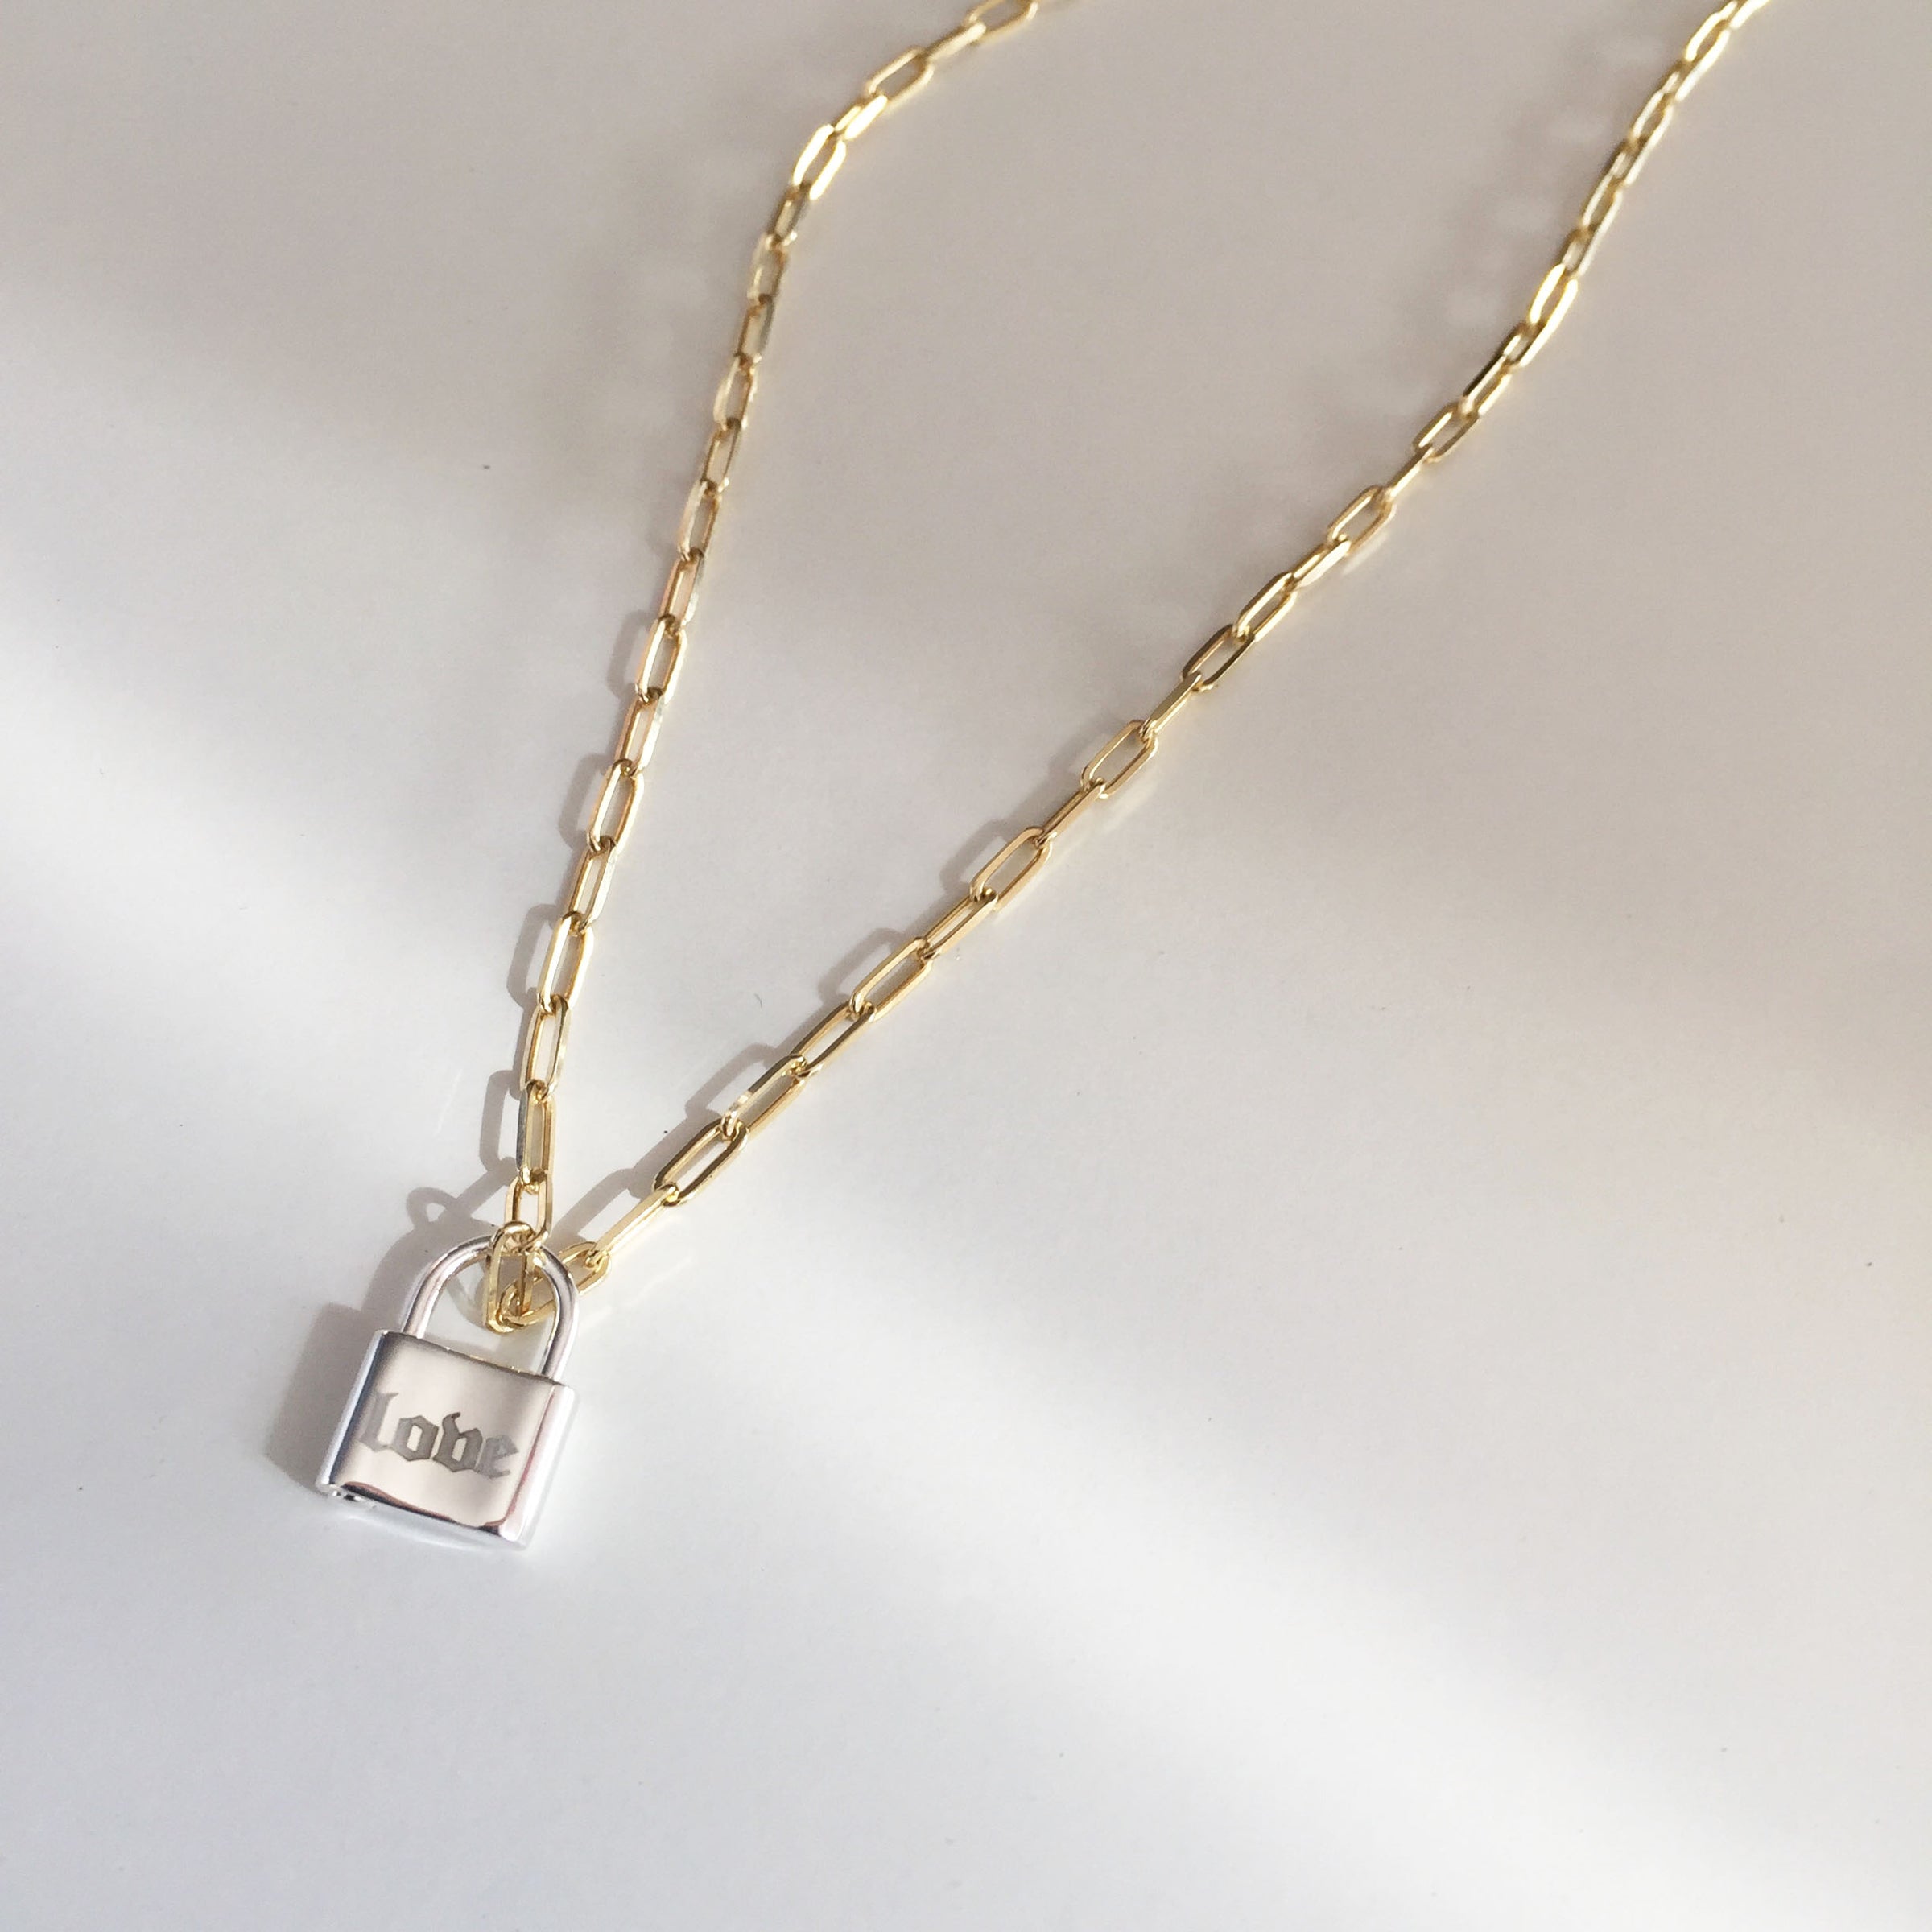 Personalized Lock Necklace